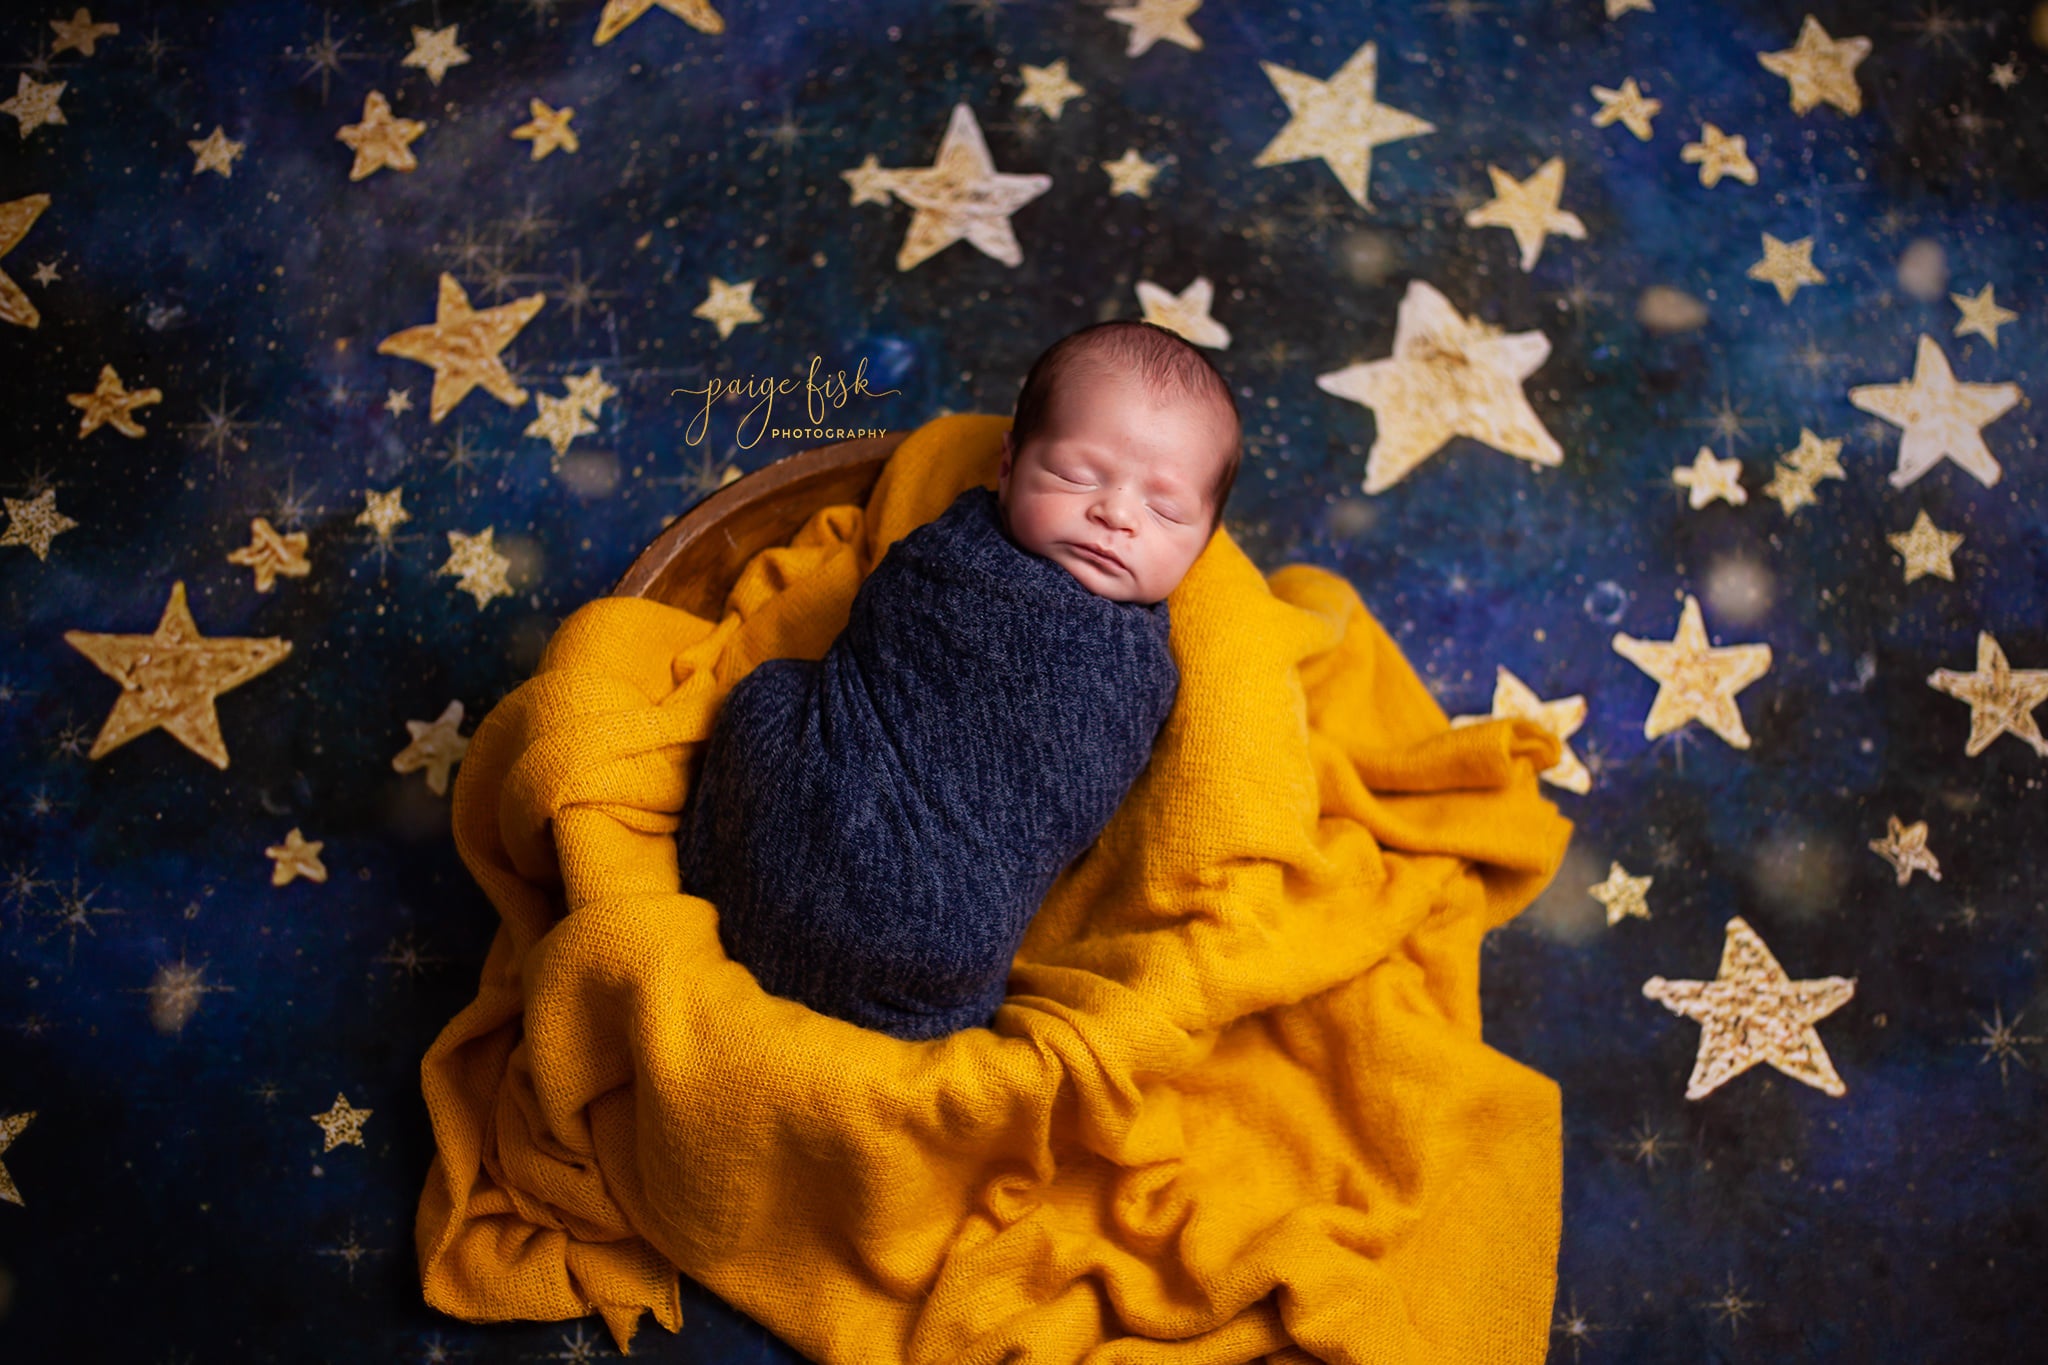 Kate Night Sky with Gold Stars Children Birthday Backdrop for Photography Designed by Mandy Ringe Photography